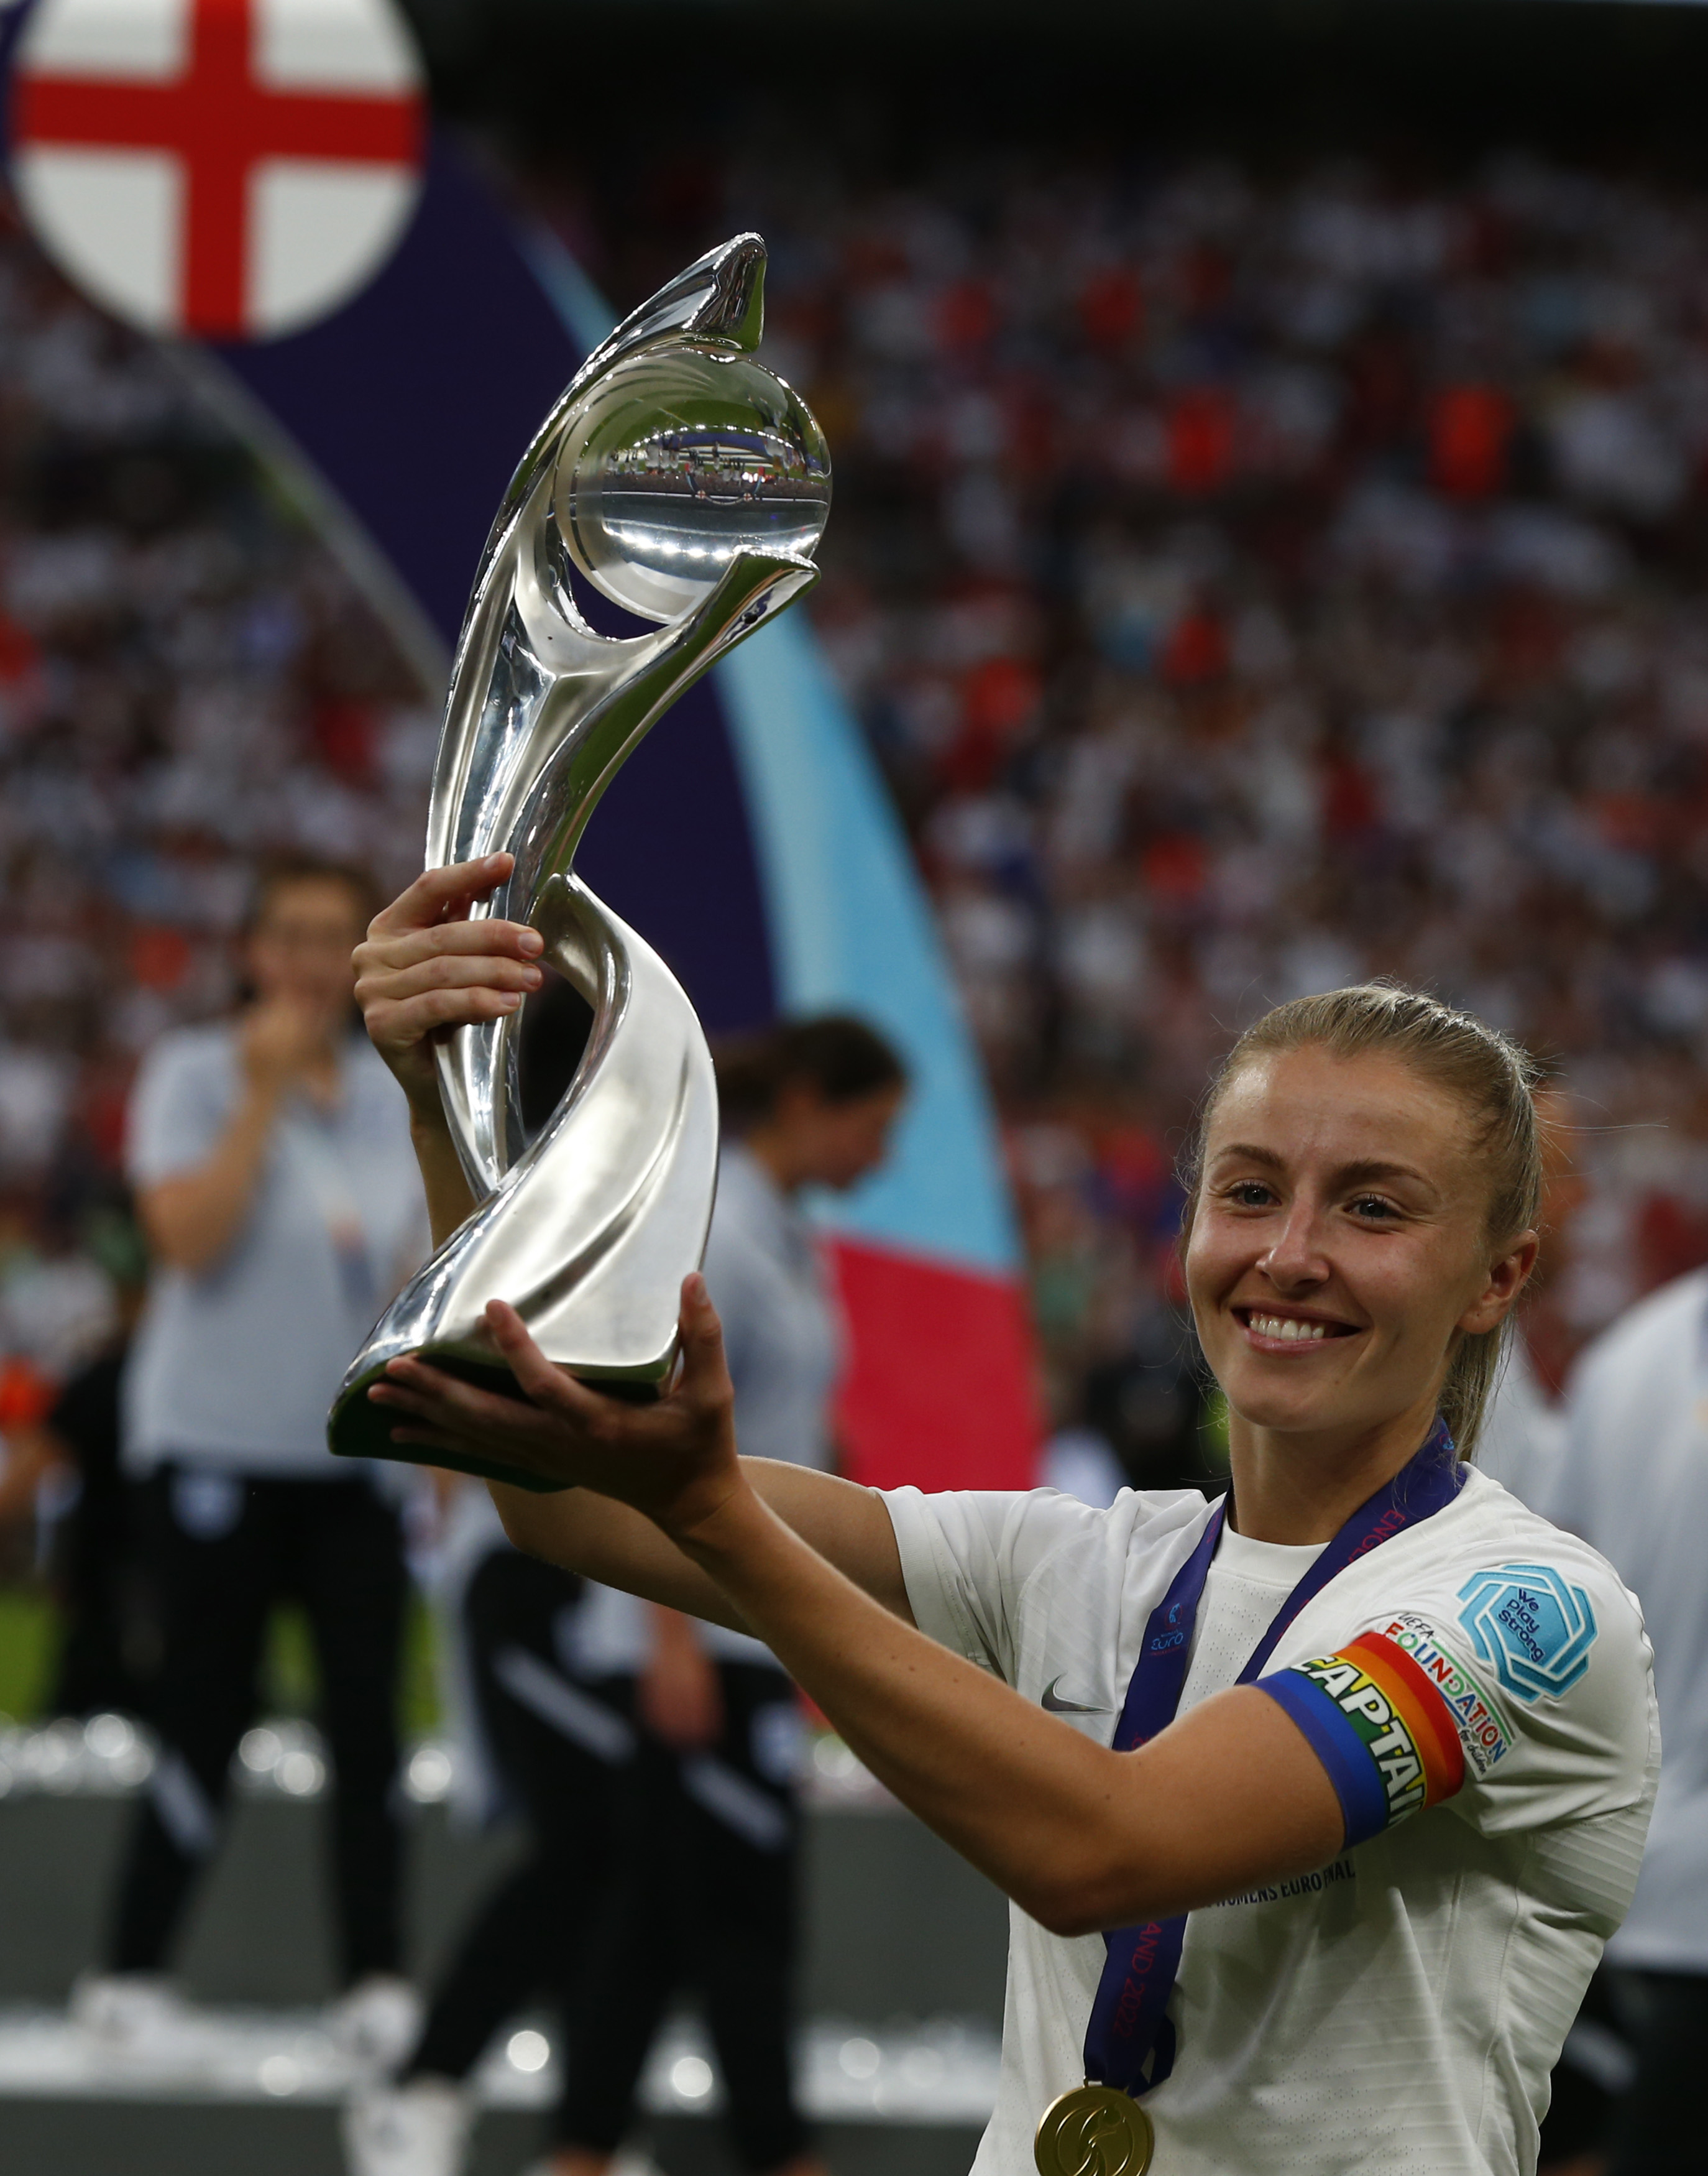 Leah Williamson led her country to glory at the Euros 2022